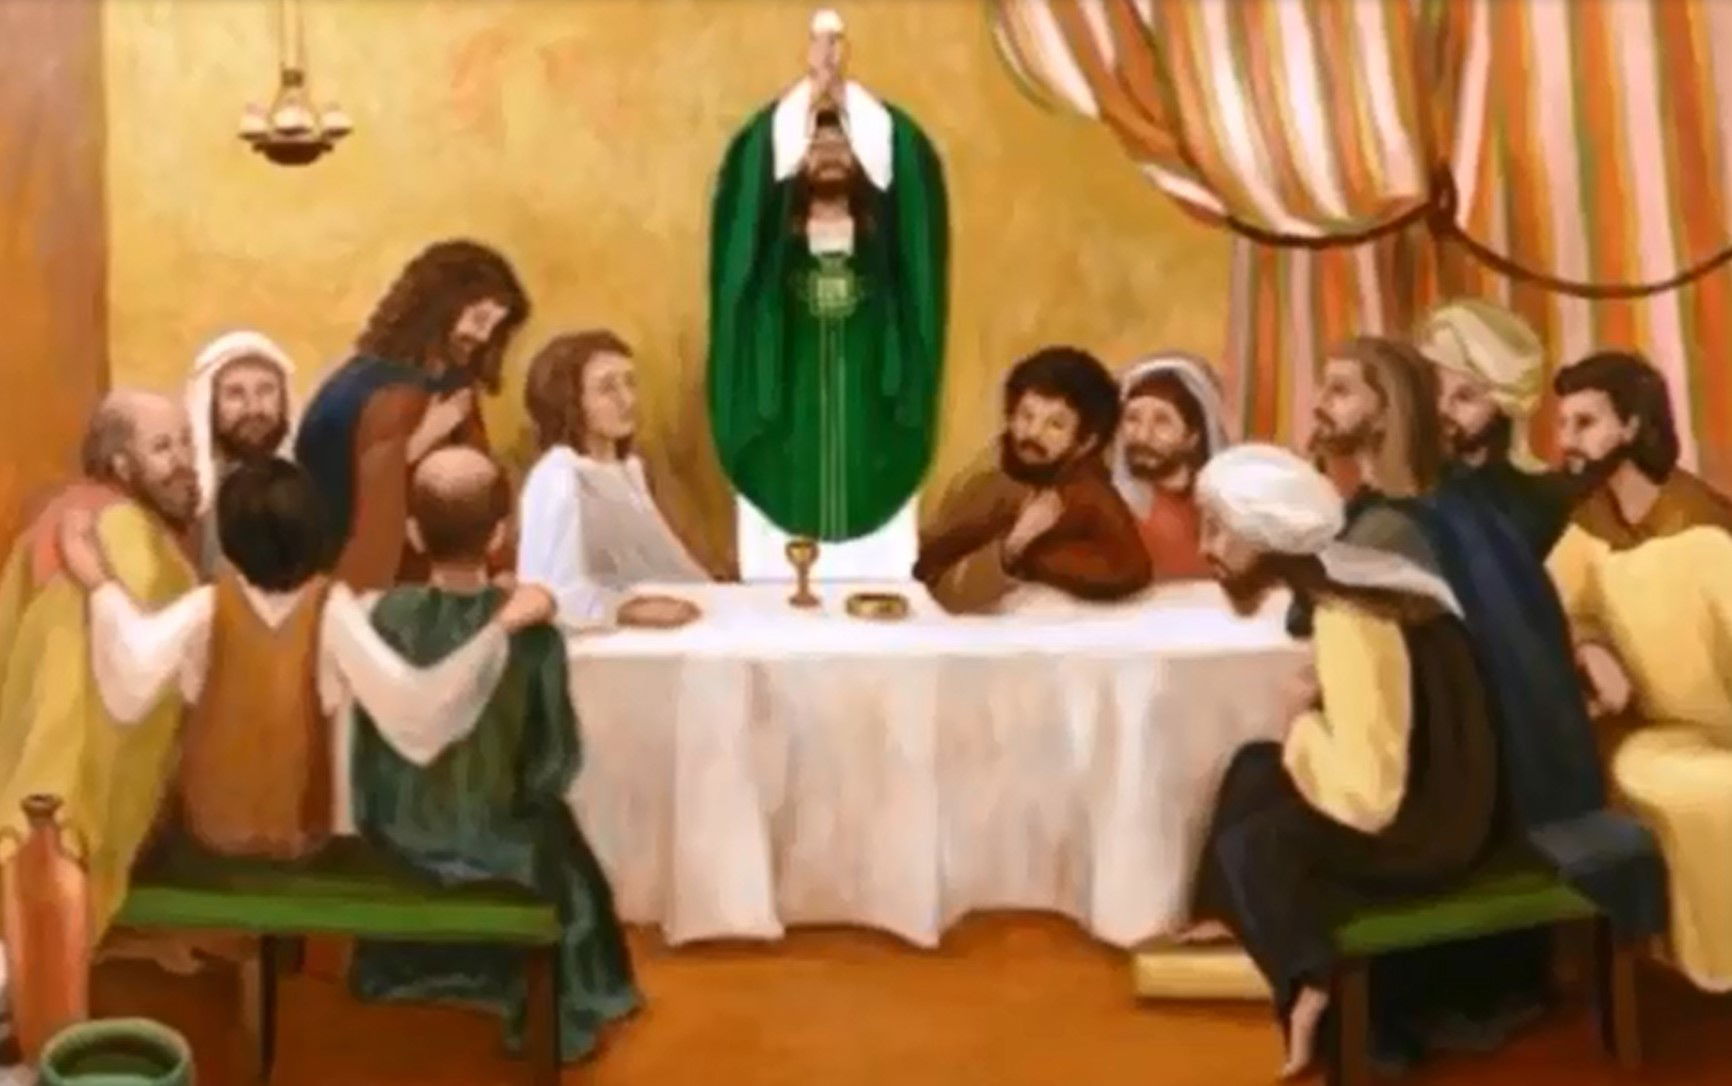 The Last Supper - The First Eucharist